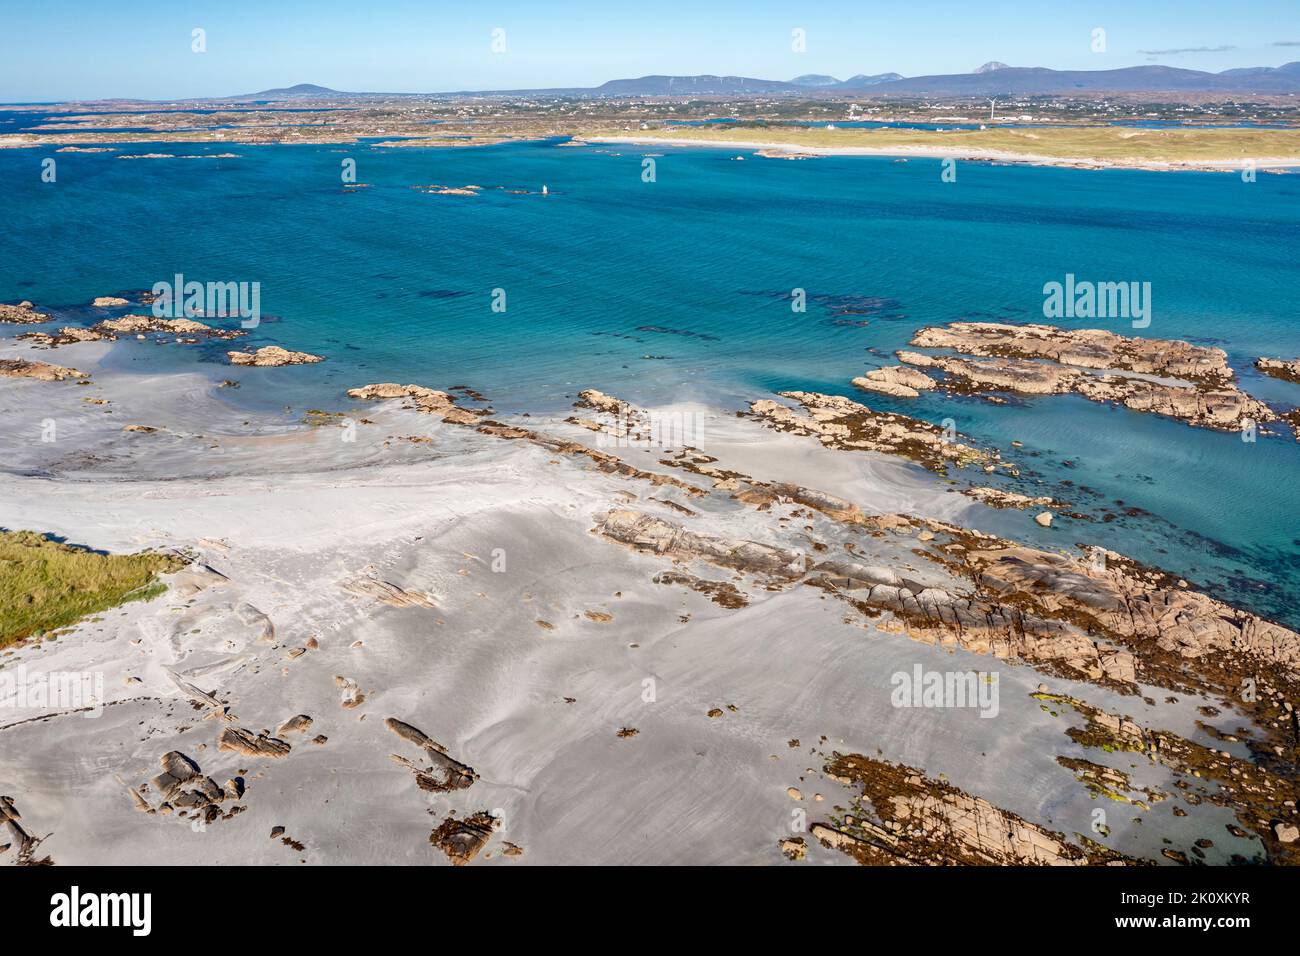 Aerial view of Clouhhcorr beach on Arranmore Island in County Donegal, Republic of Ireland. Stock Photo